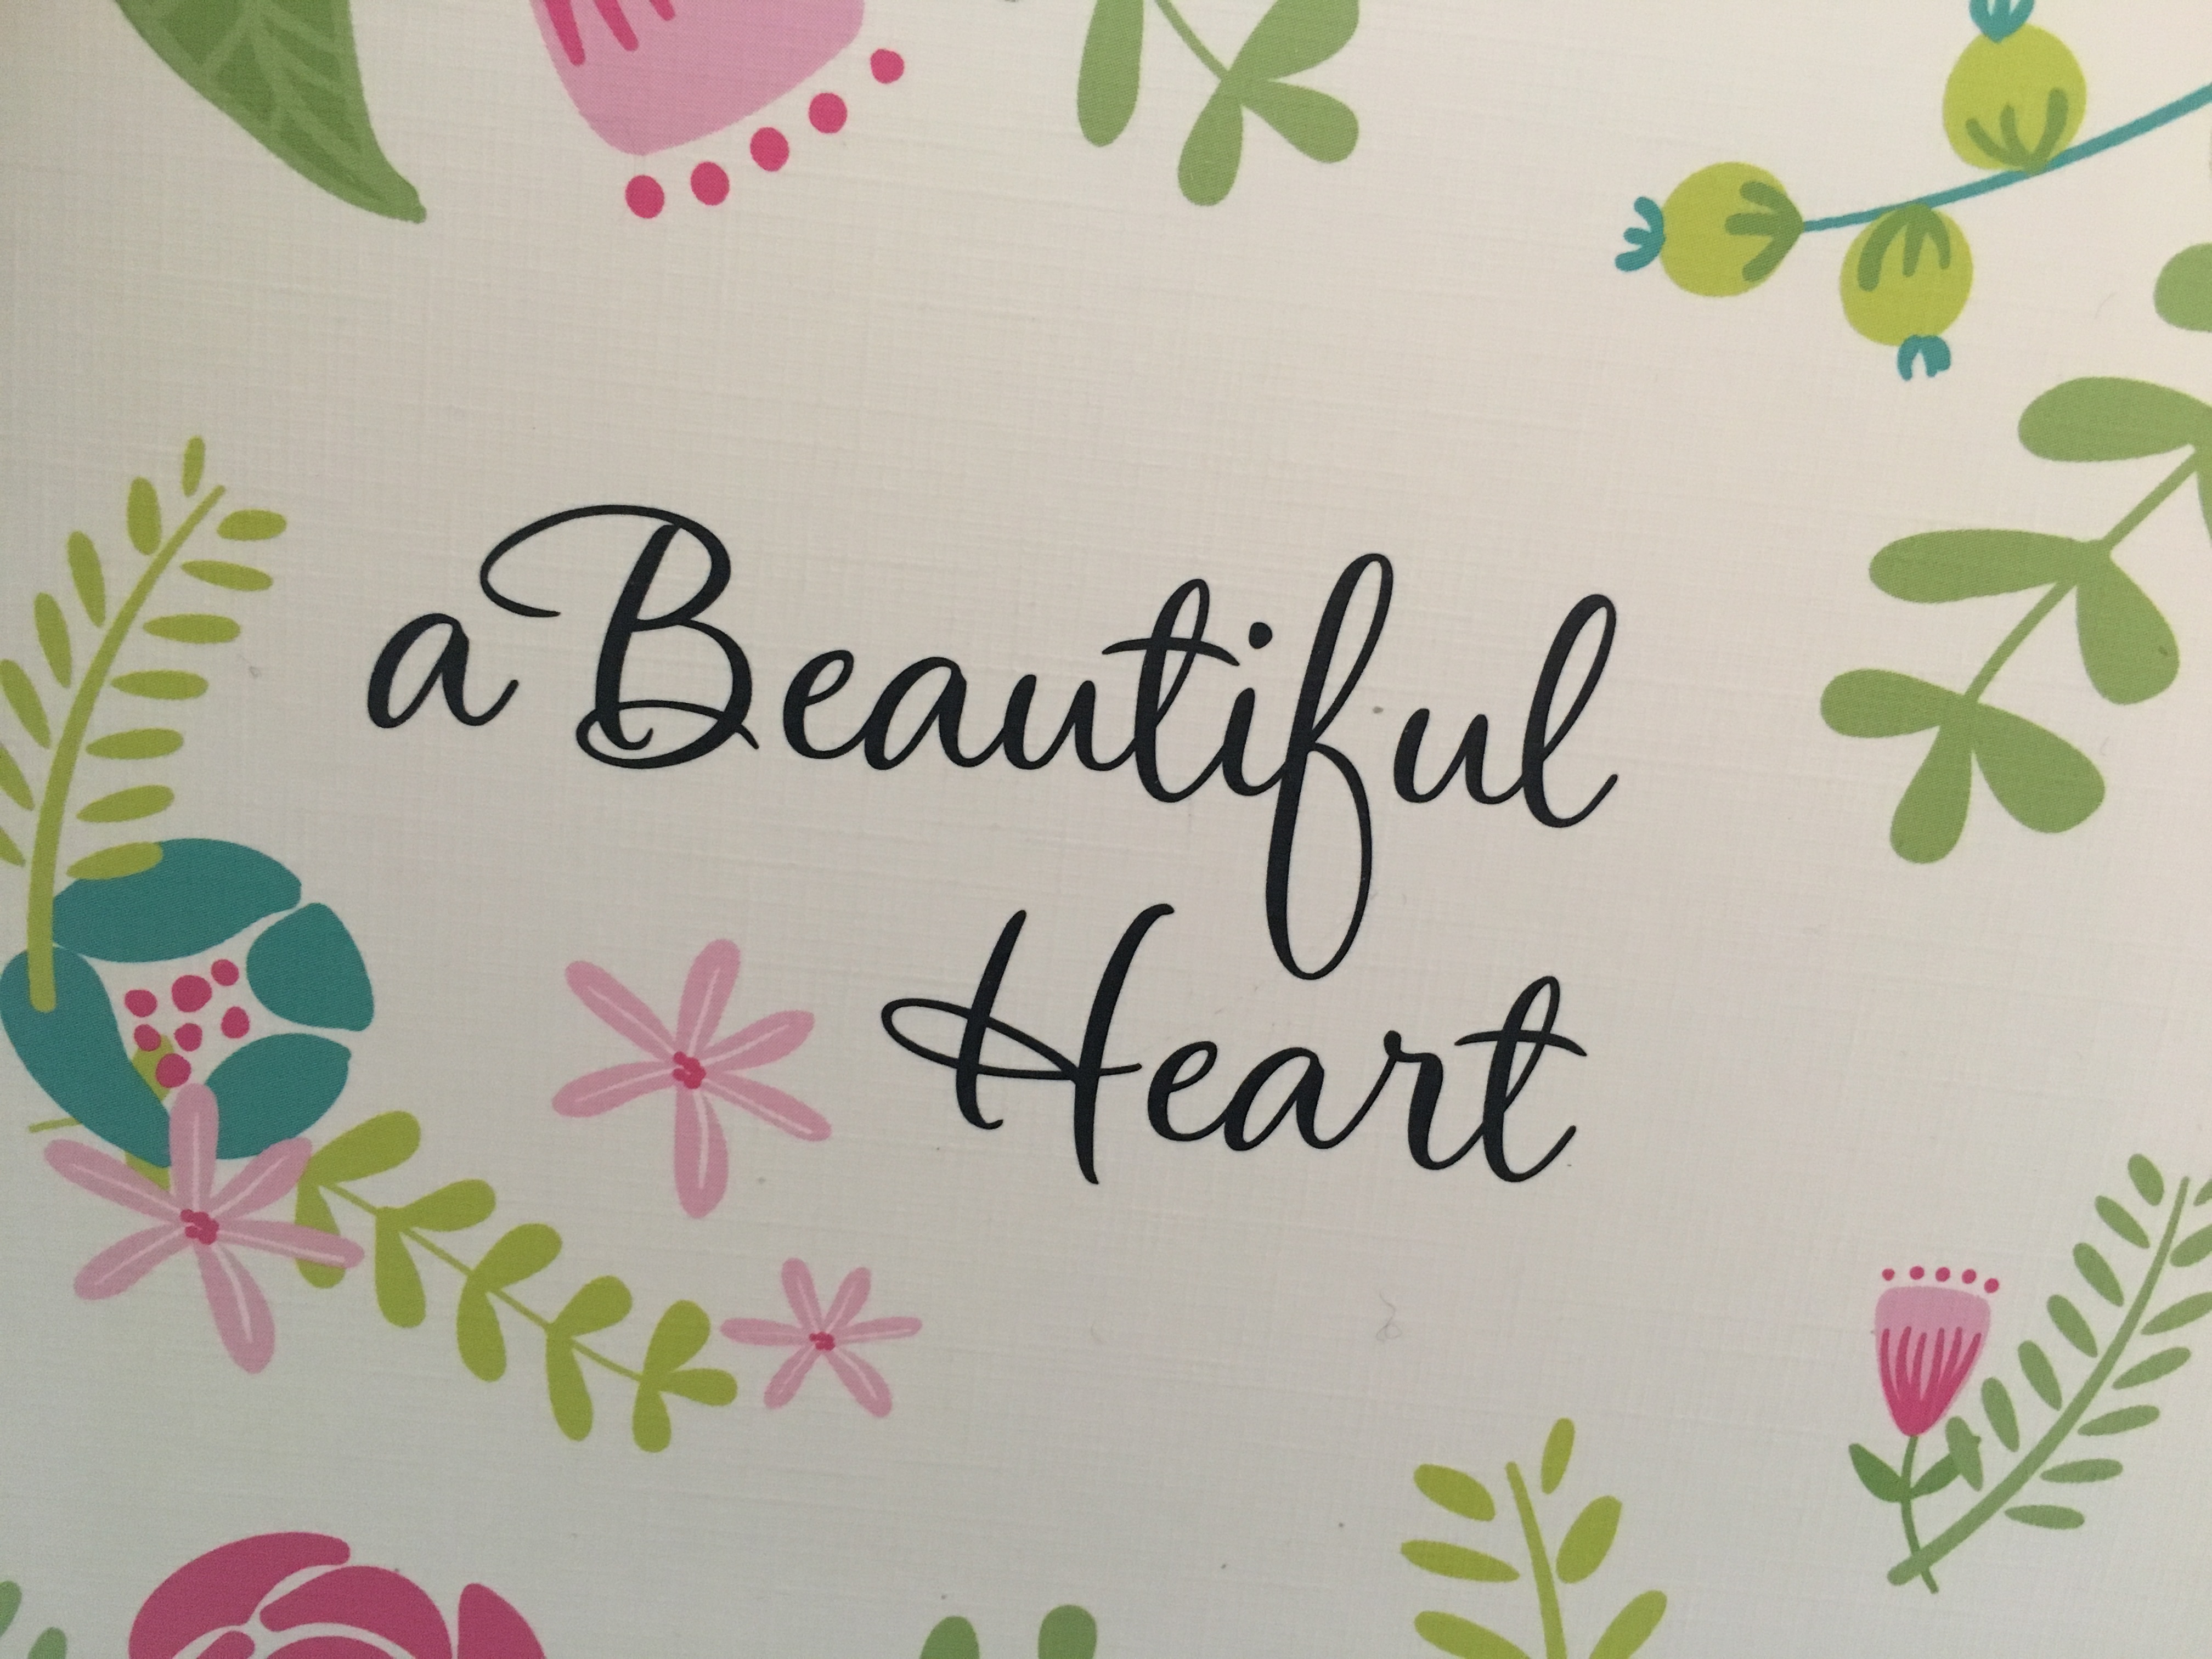 Cultivating The Beautiful Heart